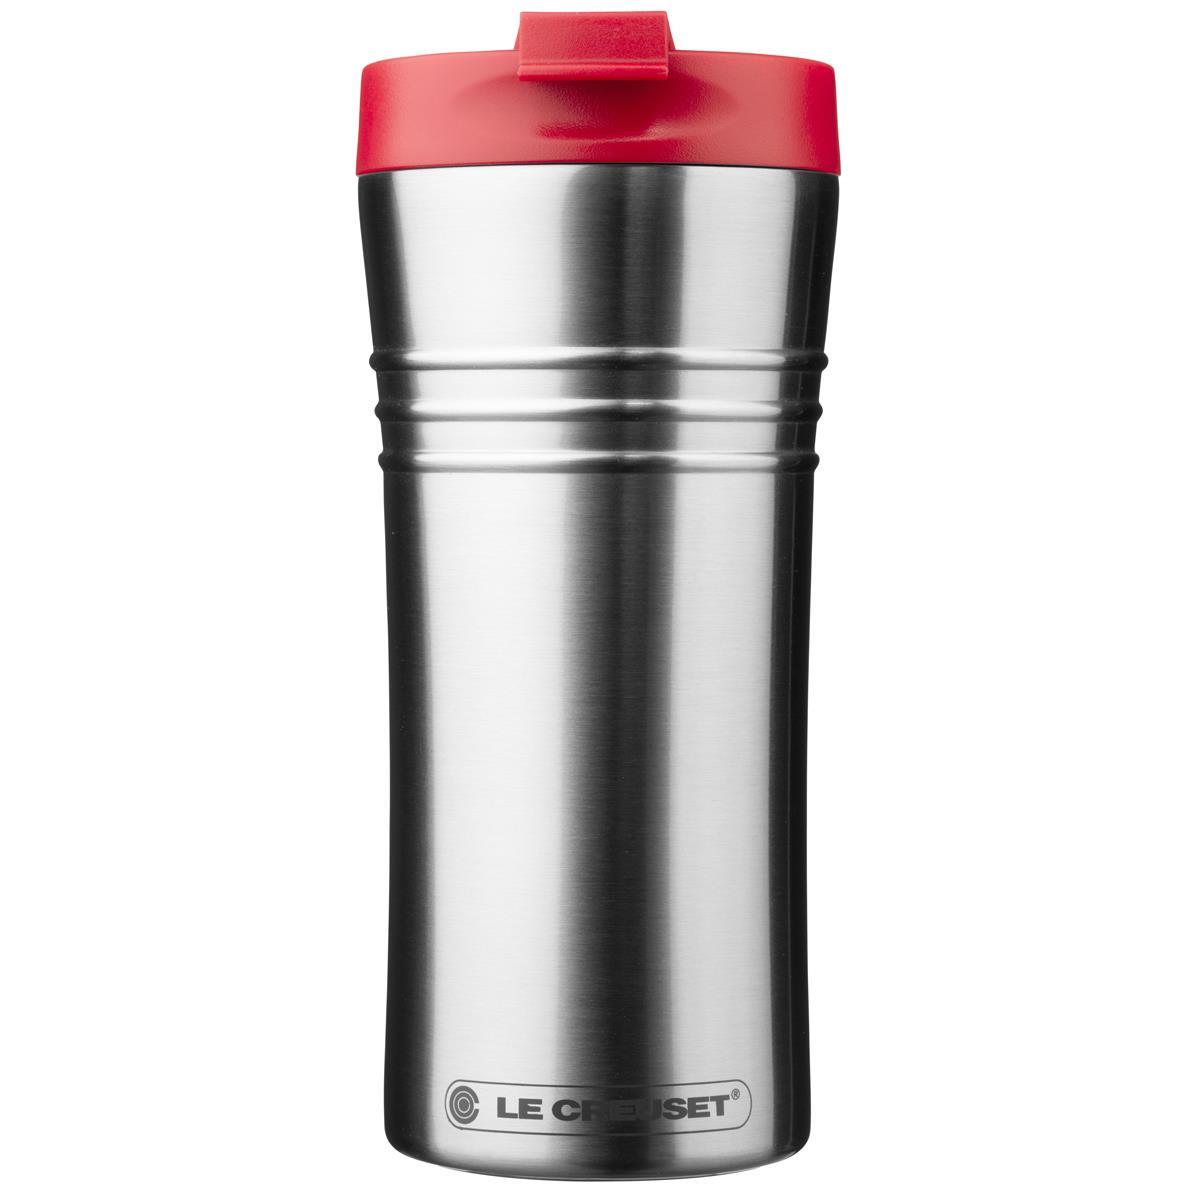 What sizes does the Le Creuset travel mug come in?